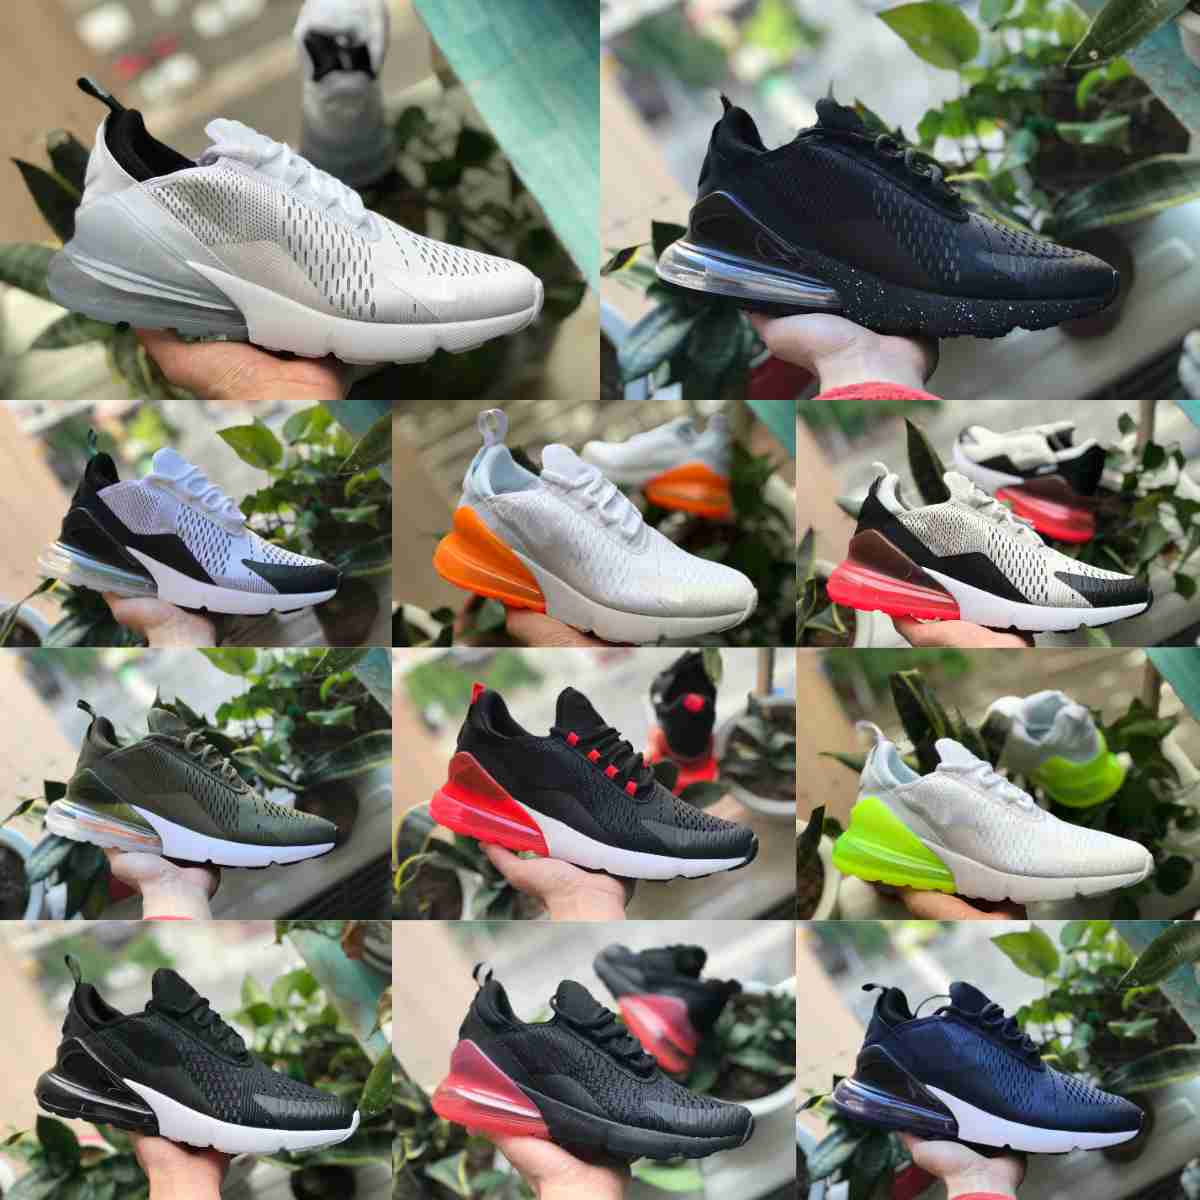 

2023 Dusty Cactus 270 Shoes Mens Tennis Runner Sneakers Triple True Barely Rose Black White 270s Light Bone Be Volt Women Breathable Mesh Trainer Sports Designers S30, Please contact us